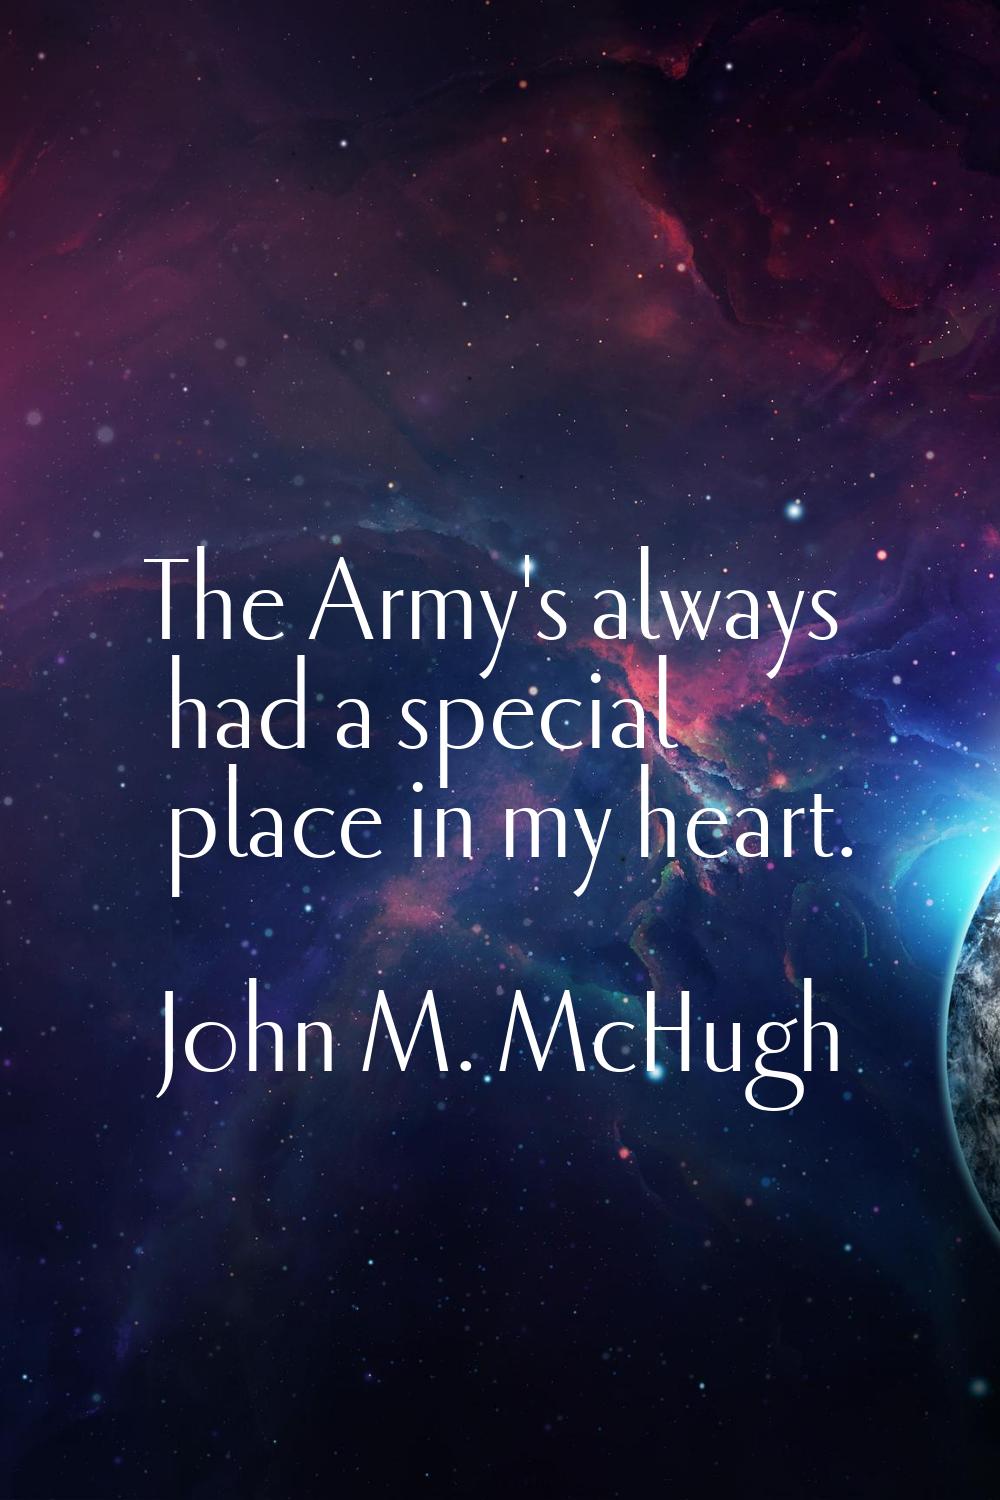 The Army's always had a special place in my heart.